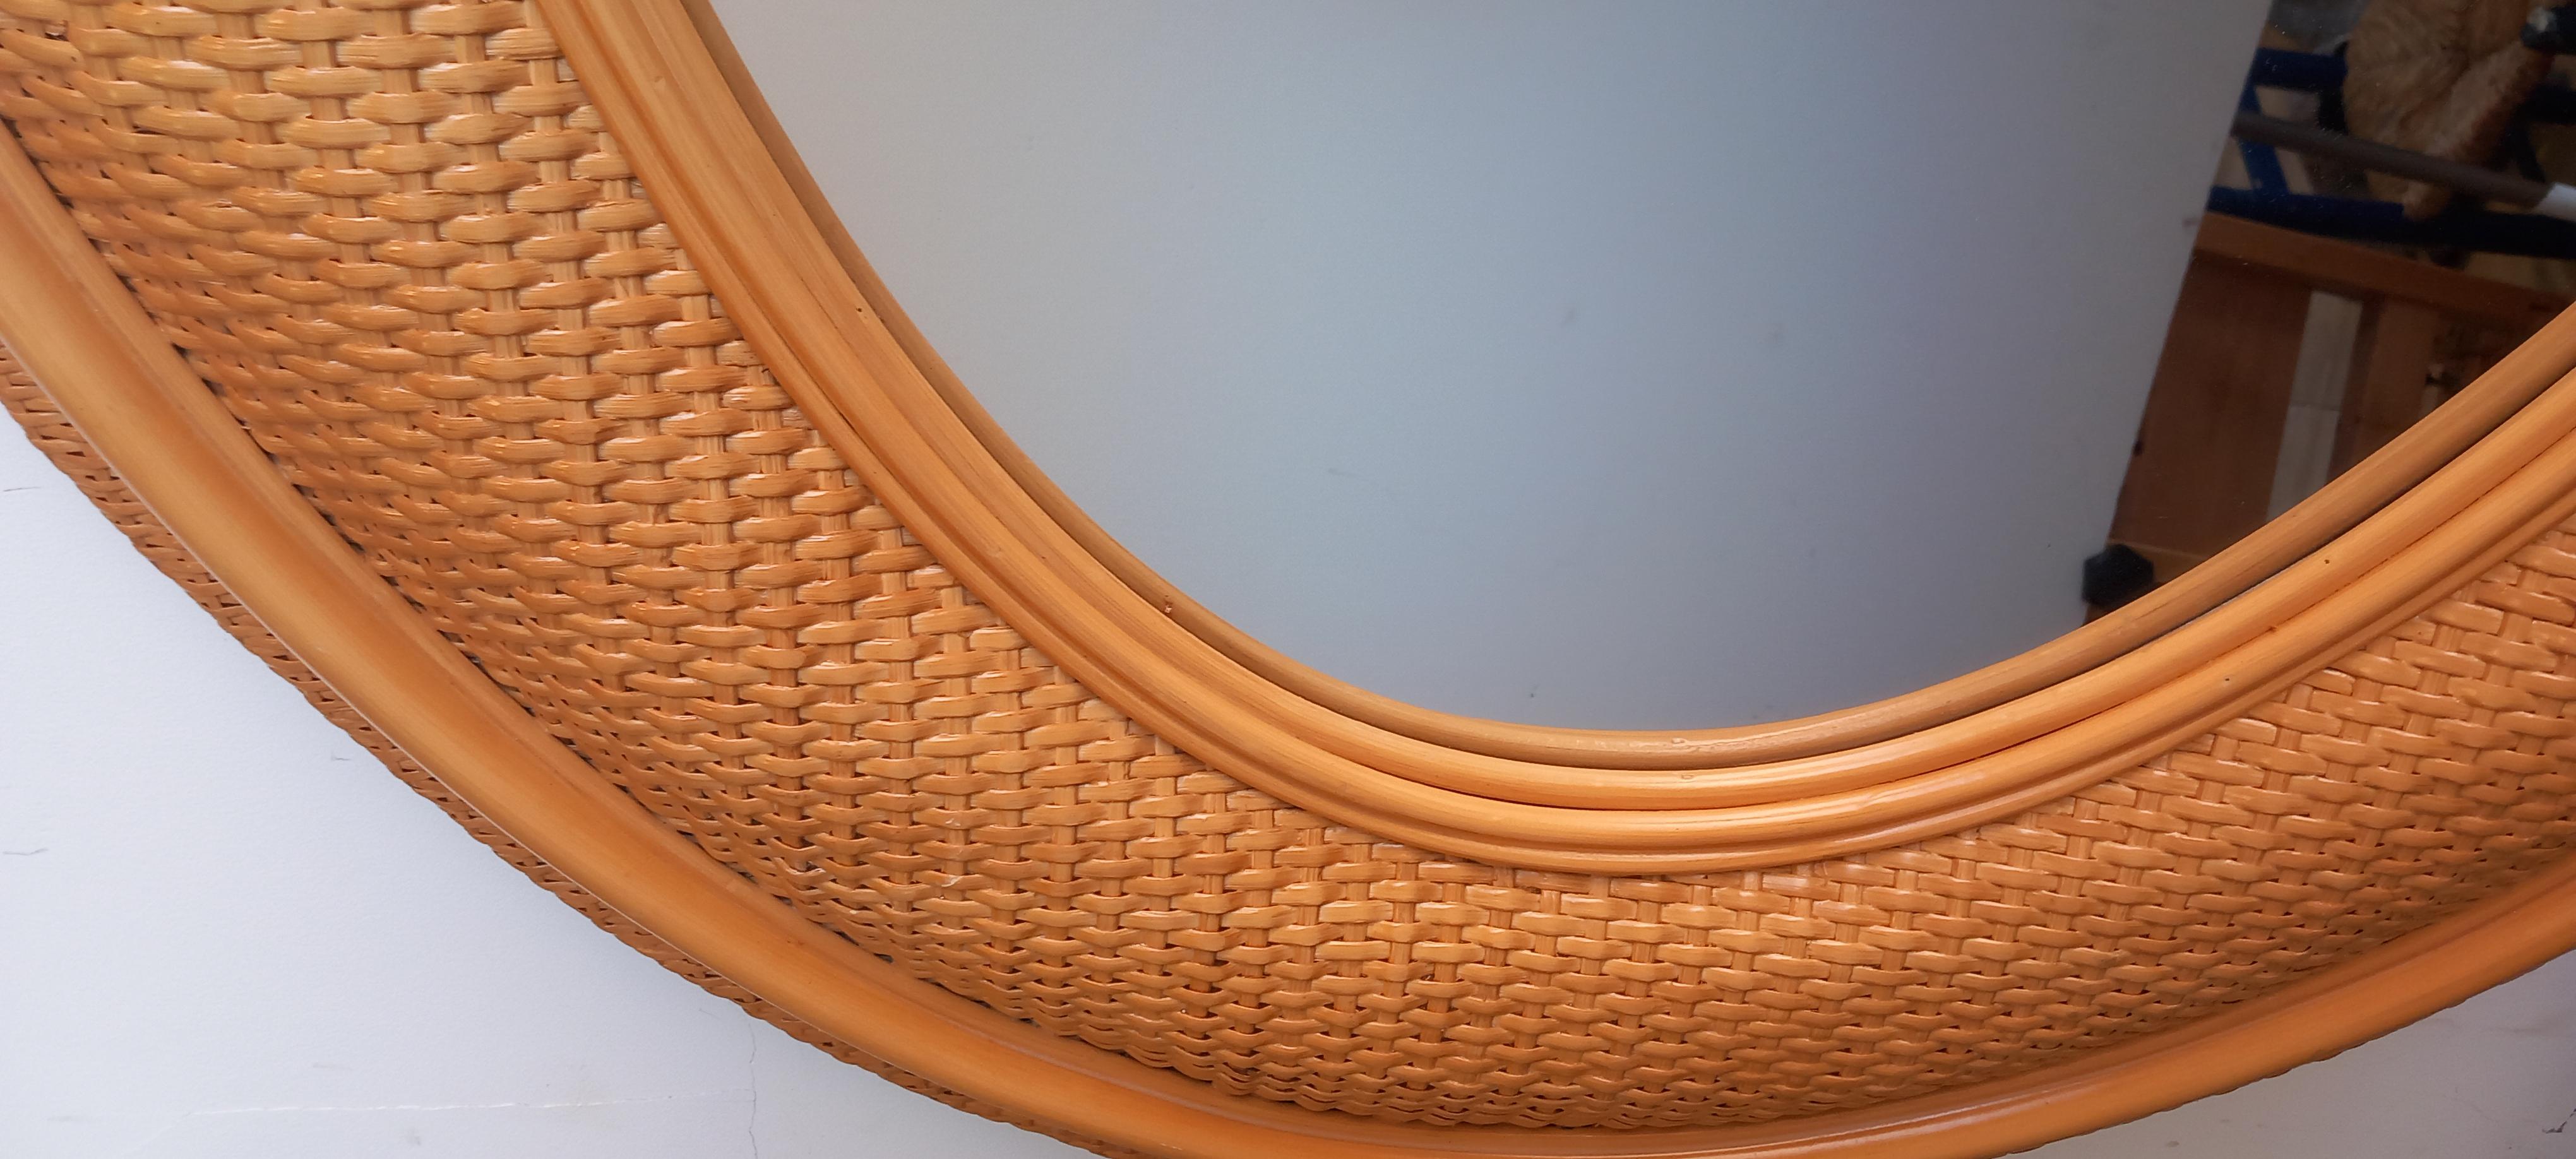 Mid-Century Modern Mirrors Rattan Rare Extra Large Oval  Mid-20th  Century 120x91 cm For Sale